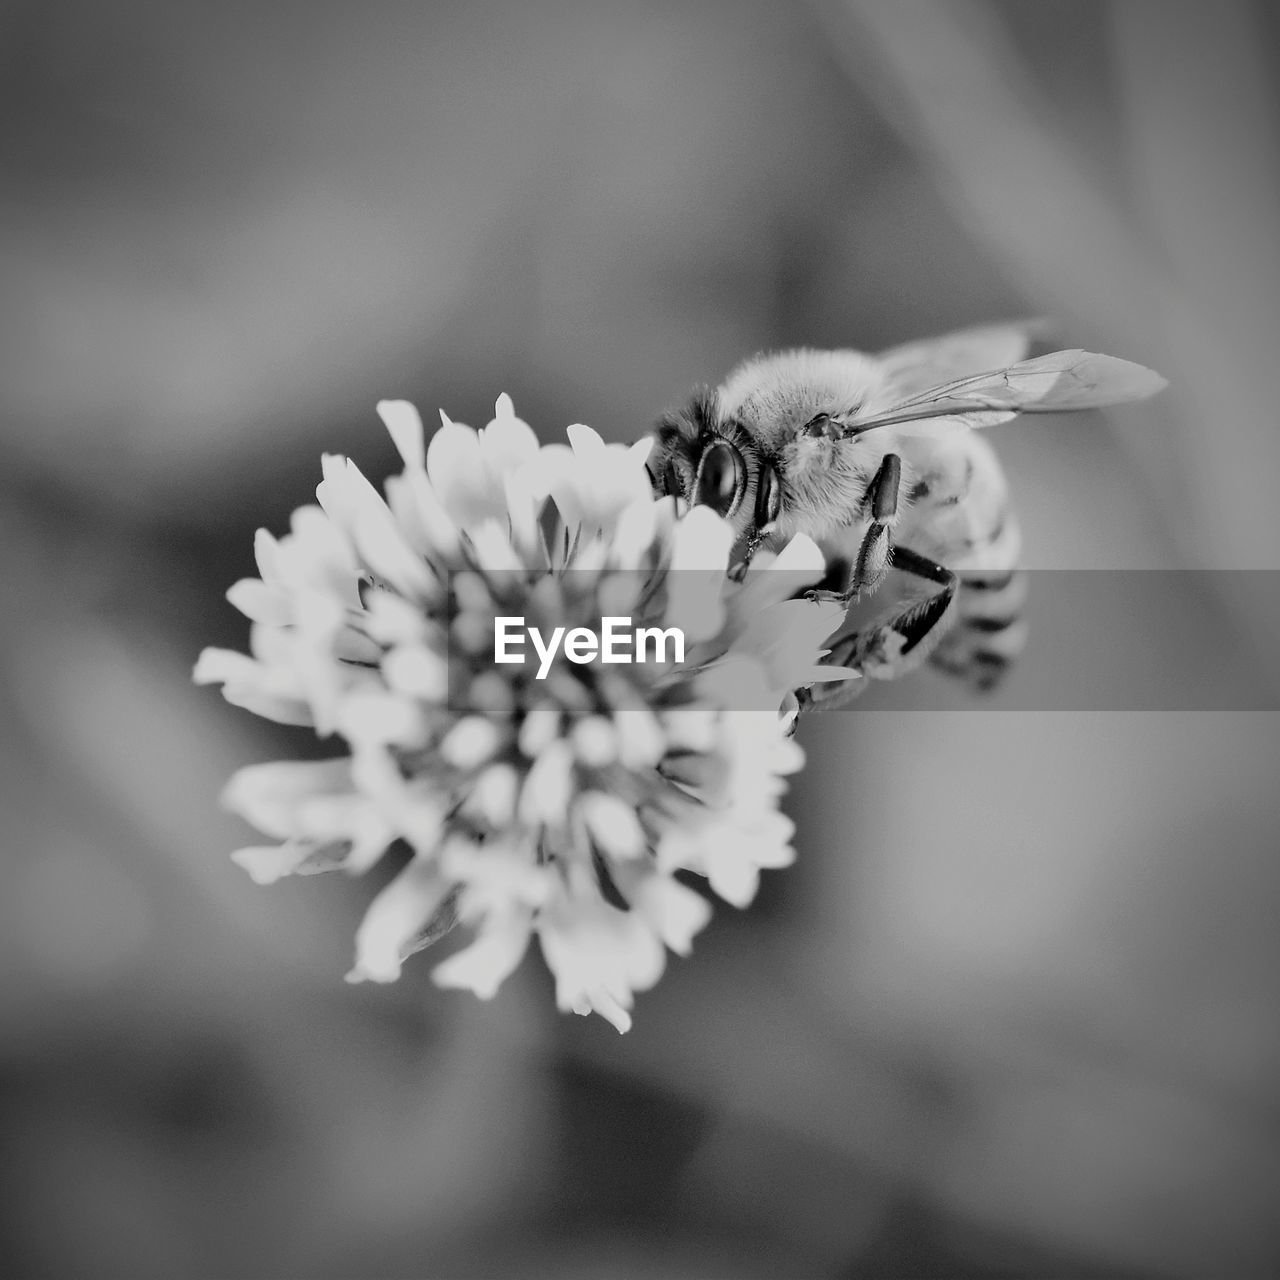 black and white, flower, flowering plant, plant, beauty in nature, freshness, monochrome photography, close-up, white, fragility, monochrome, flower head, petal, macro photography, nature, inflorescence, blossom, growth, focus on foreground, animal wildlife, animal, animal themes, no people, insect, black, pollen, selective focus, one animal, springtime, outdoors, macro, wildlife, plant stem, botany